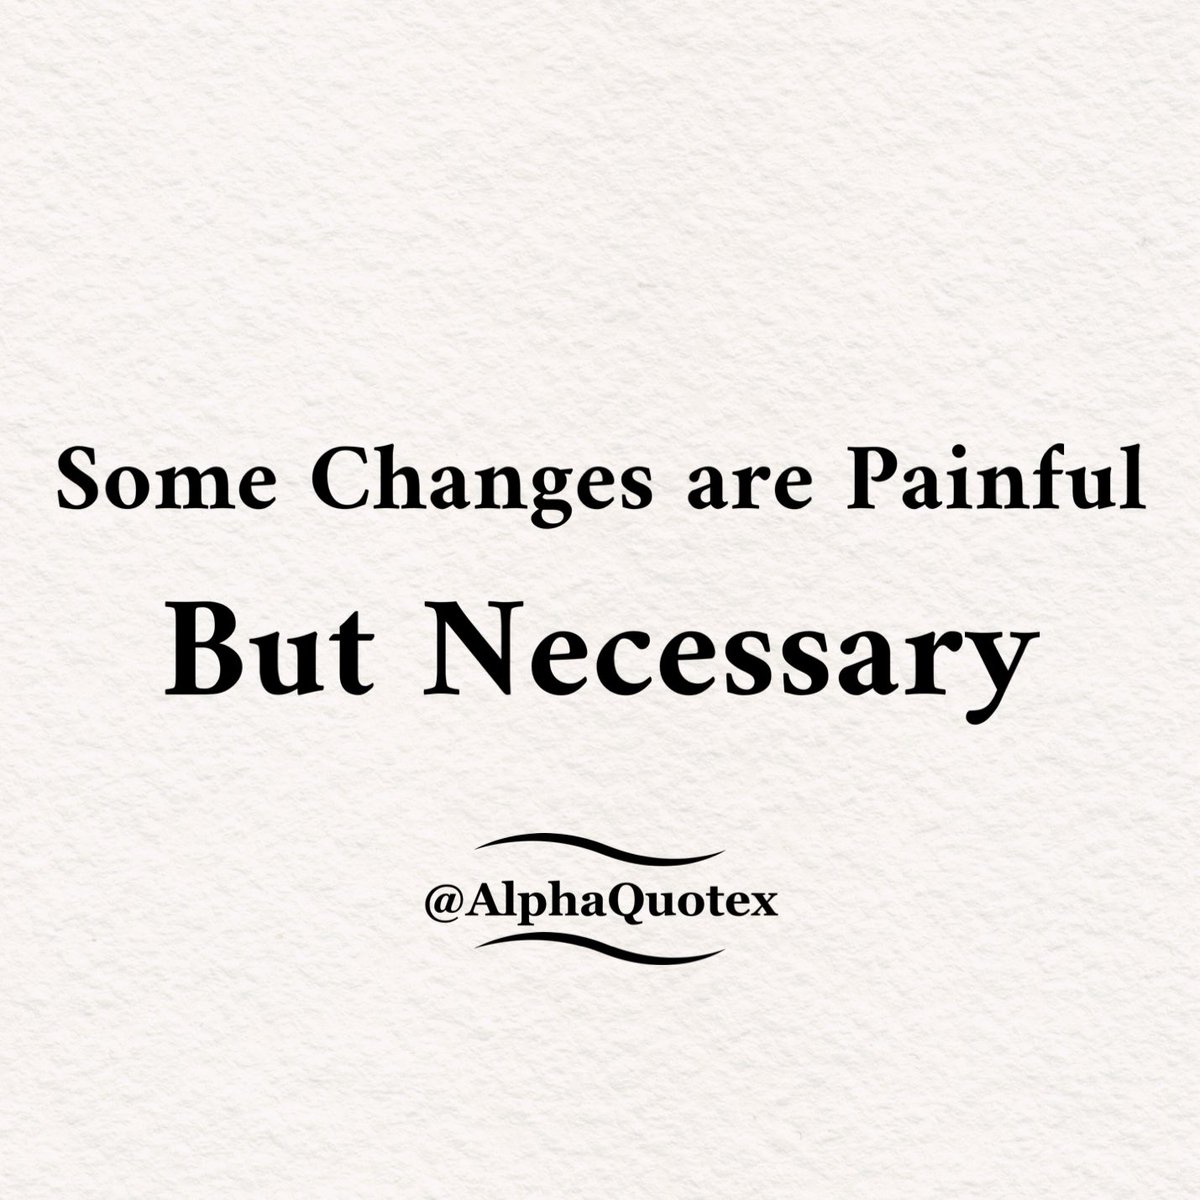 'Some changes are painful but
Necessary'
Life often demands tough adjustments, yet they're crucial for growth and progress. 
Do You Agree?
#ChangeIsNecessary #EmbraceGrowth